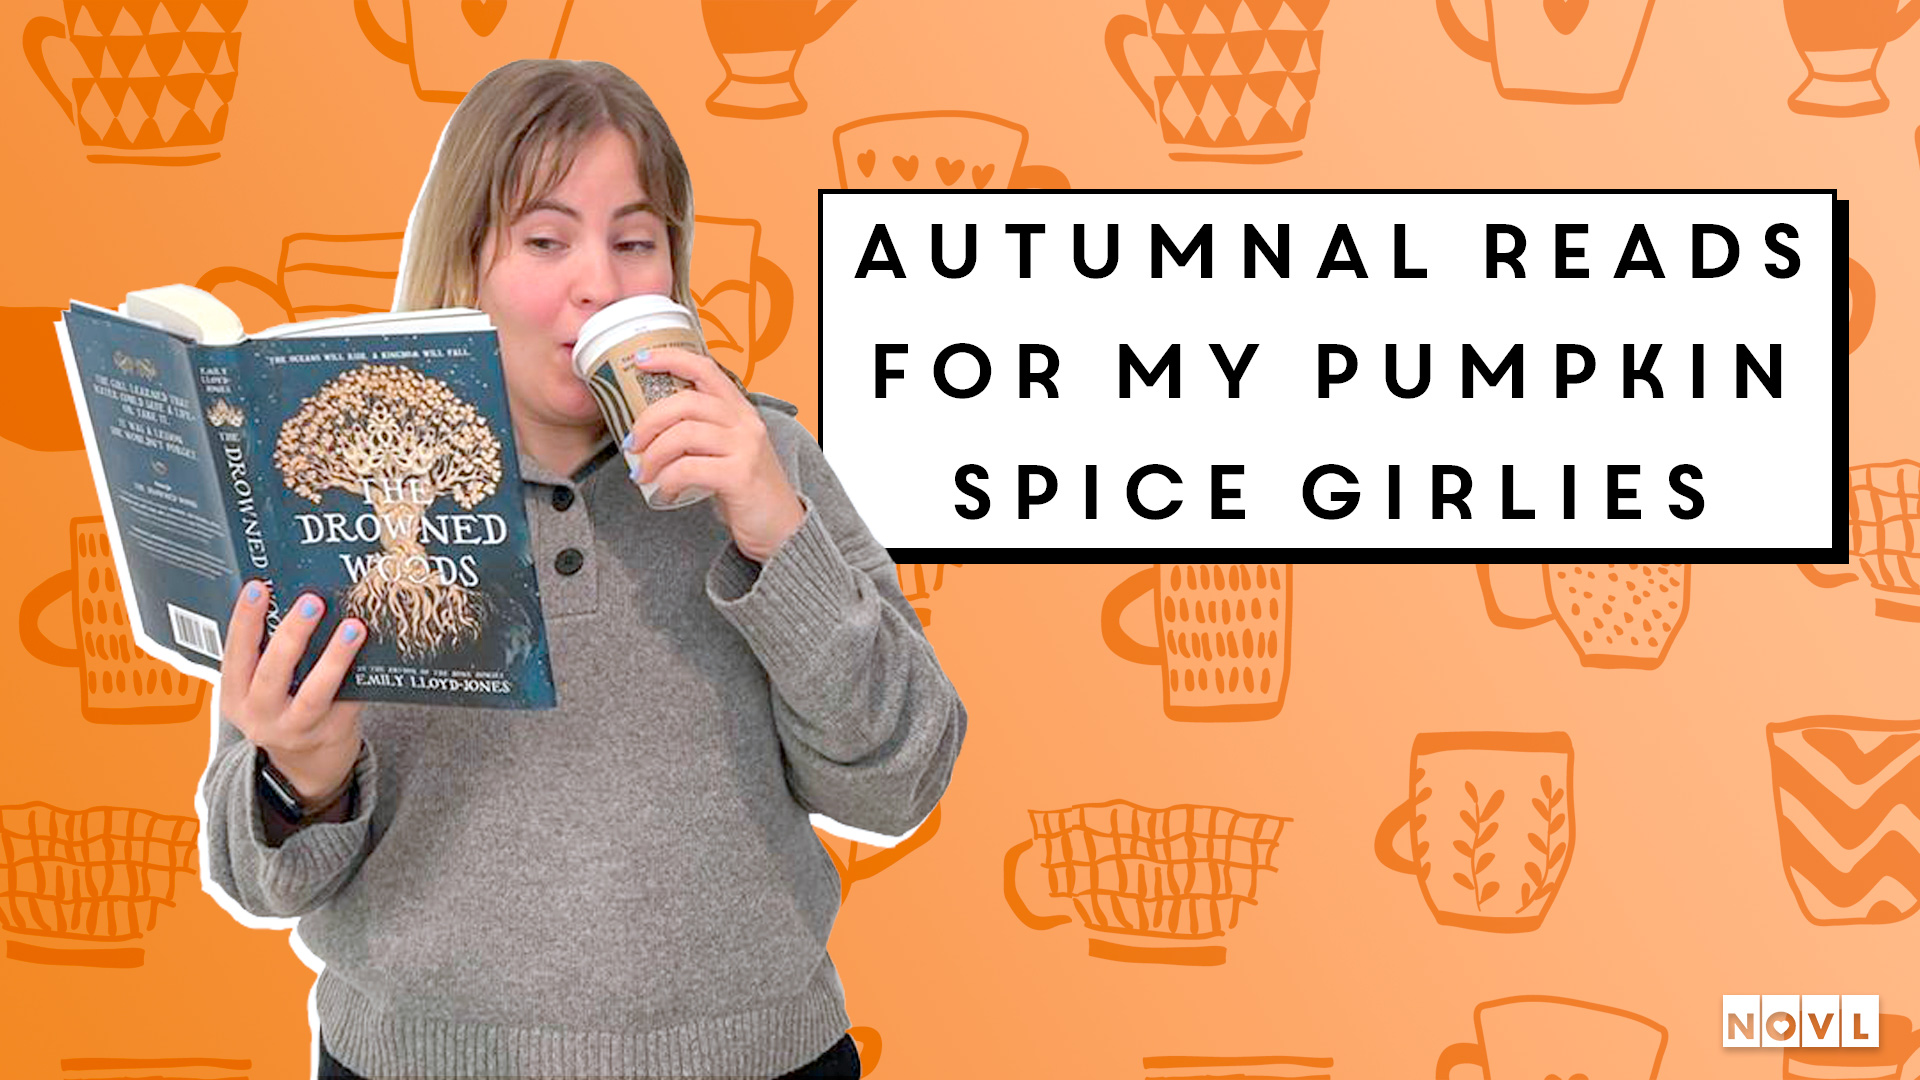 The NOVL Blog, Featured Image for Article: Autumnal Reads for My Pumpkin Spice Girlies